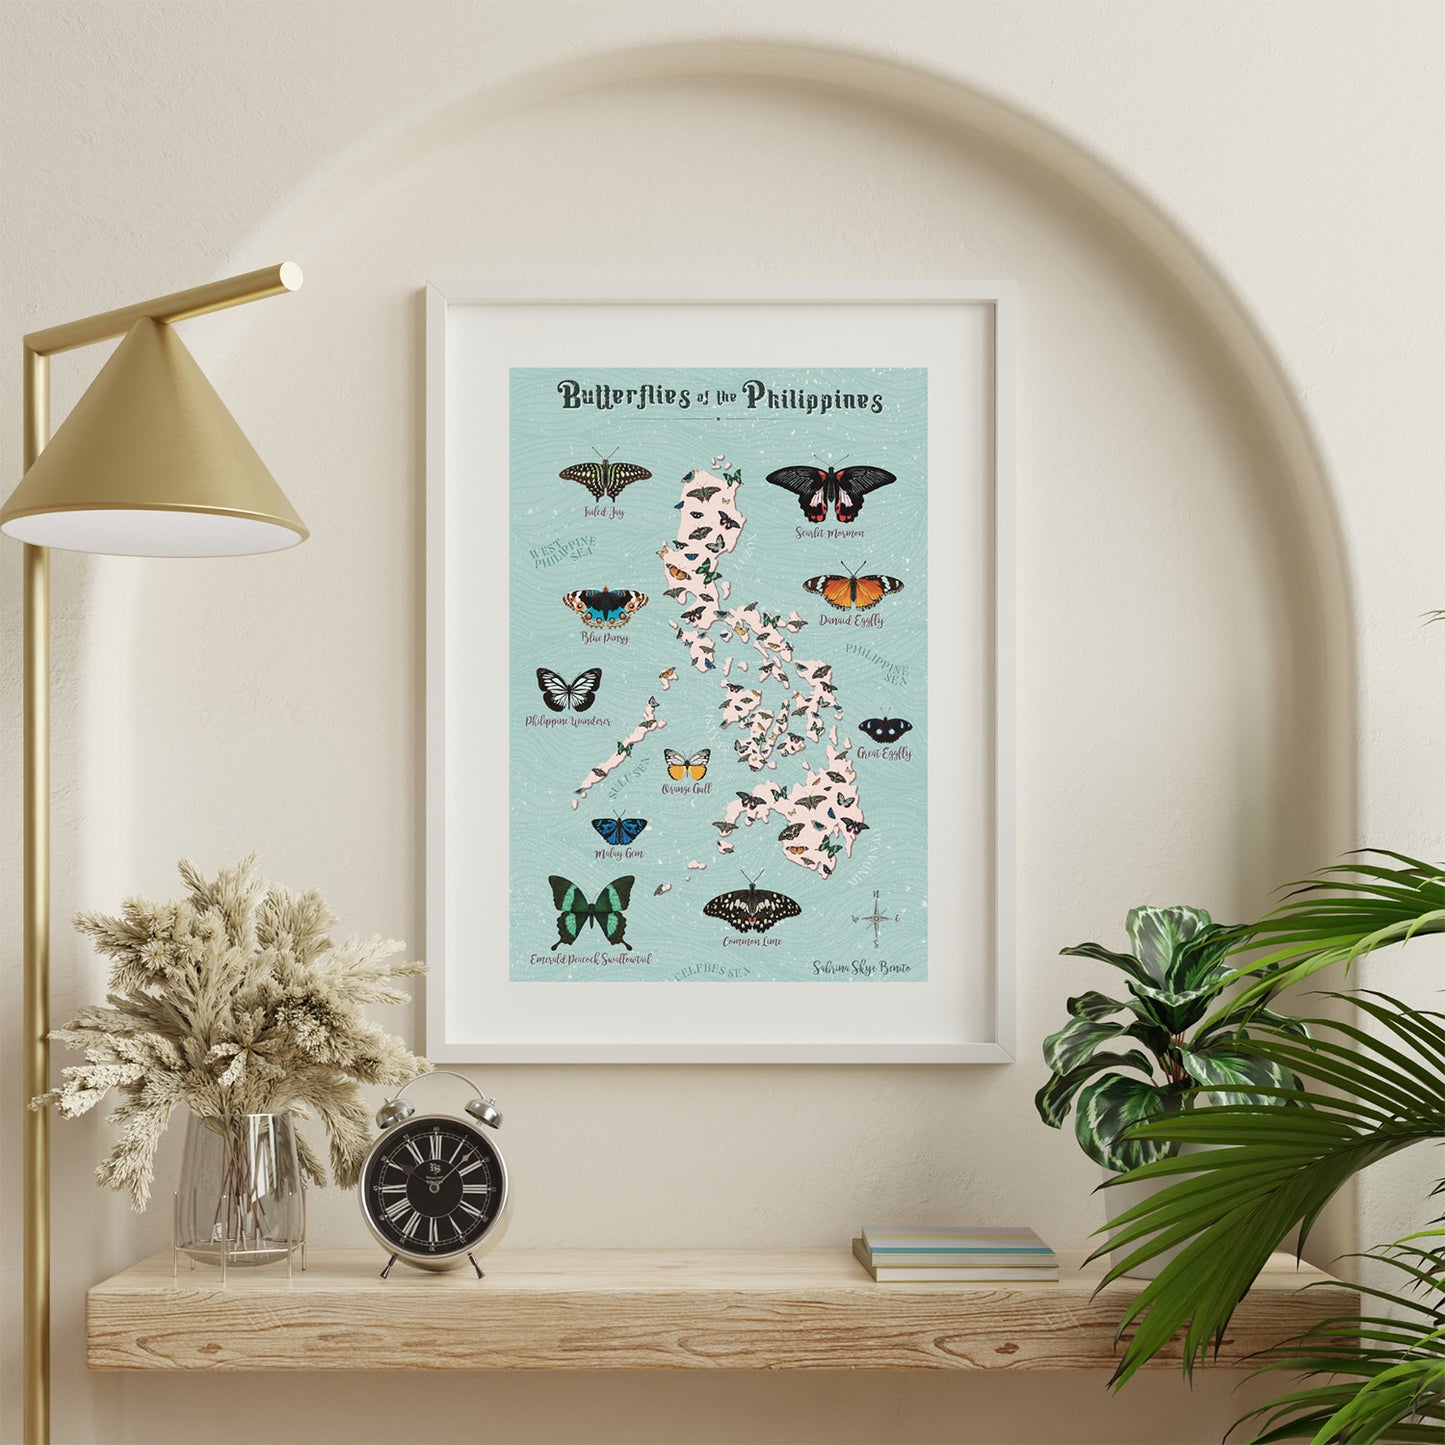 Filipino artist graphic butterfly species local pinoy coloured wall decoration decor idea tourist map art print artwork collection framed framing modern interior